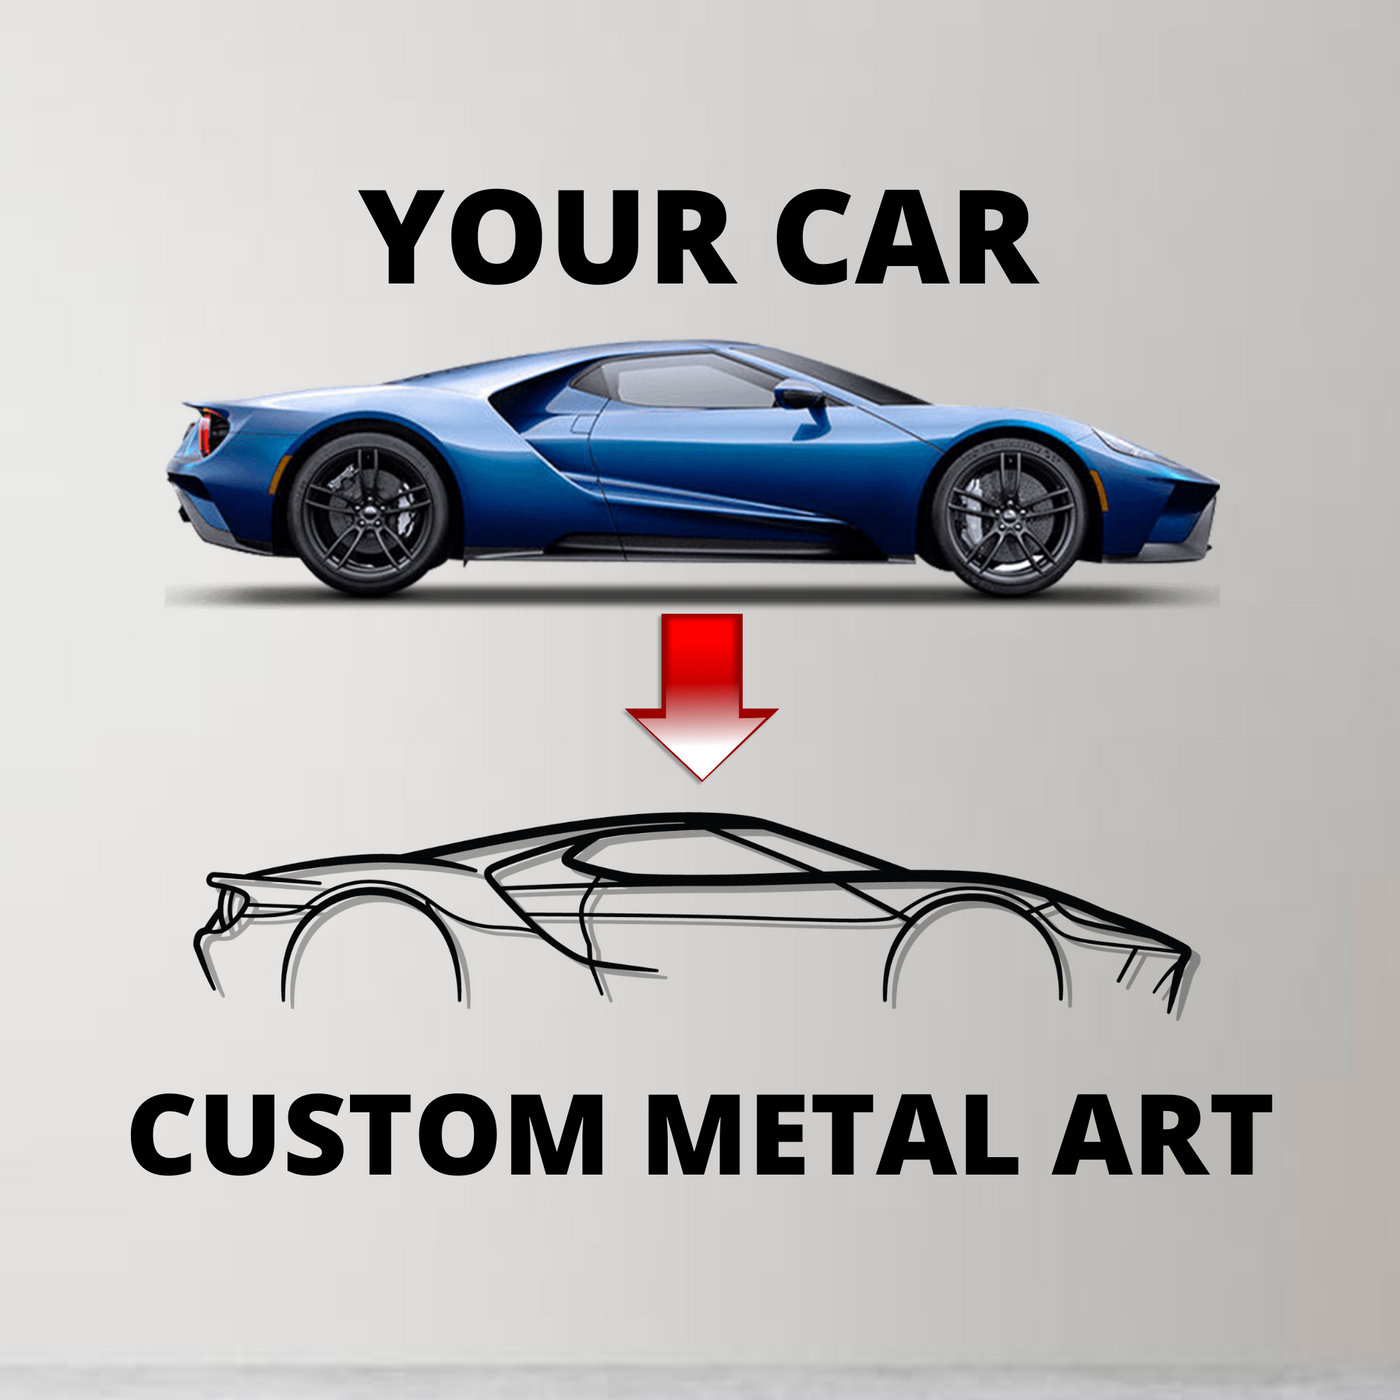 458 Spider 2015 cabrio Detailed Silhouette Metal Wall Art